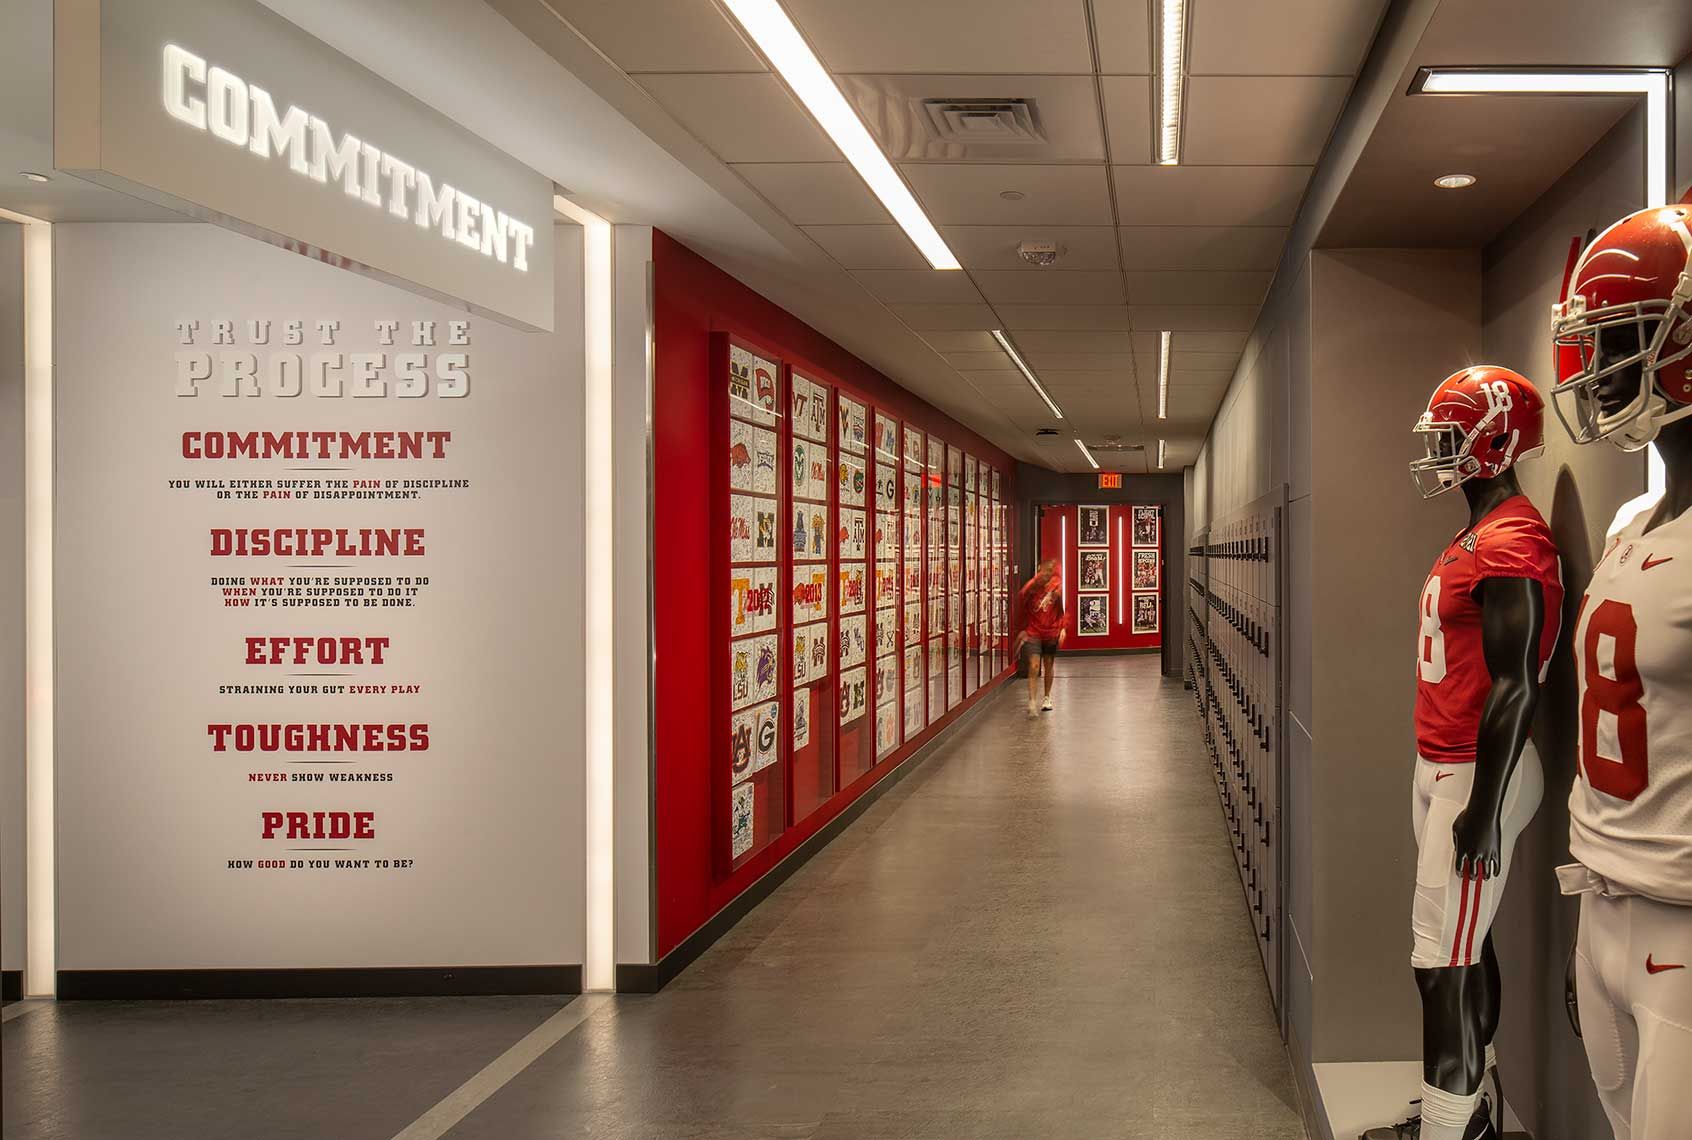 This corridor of the University of Alabama Training Facility is adorned with graphics and inspirational quotes